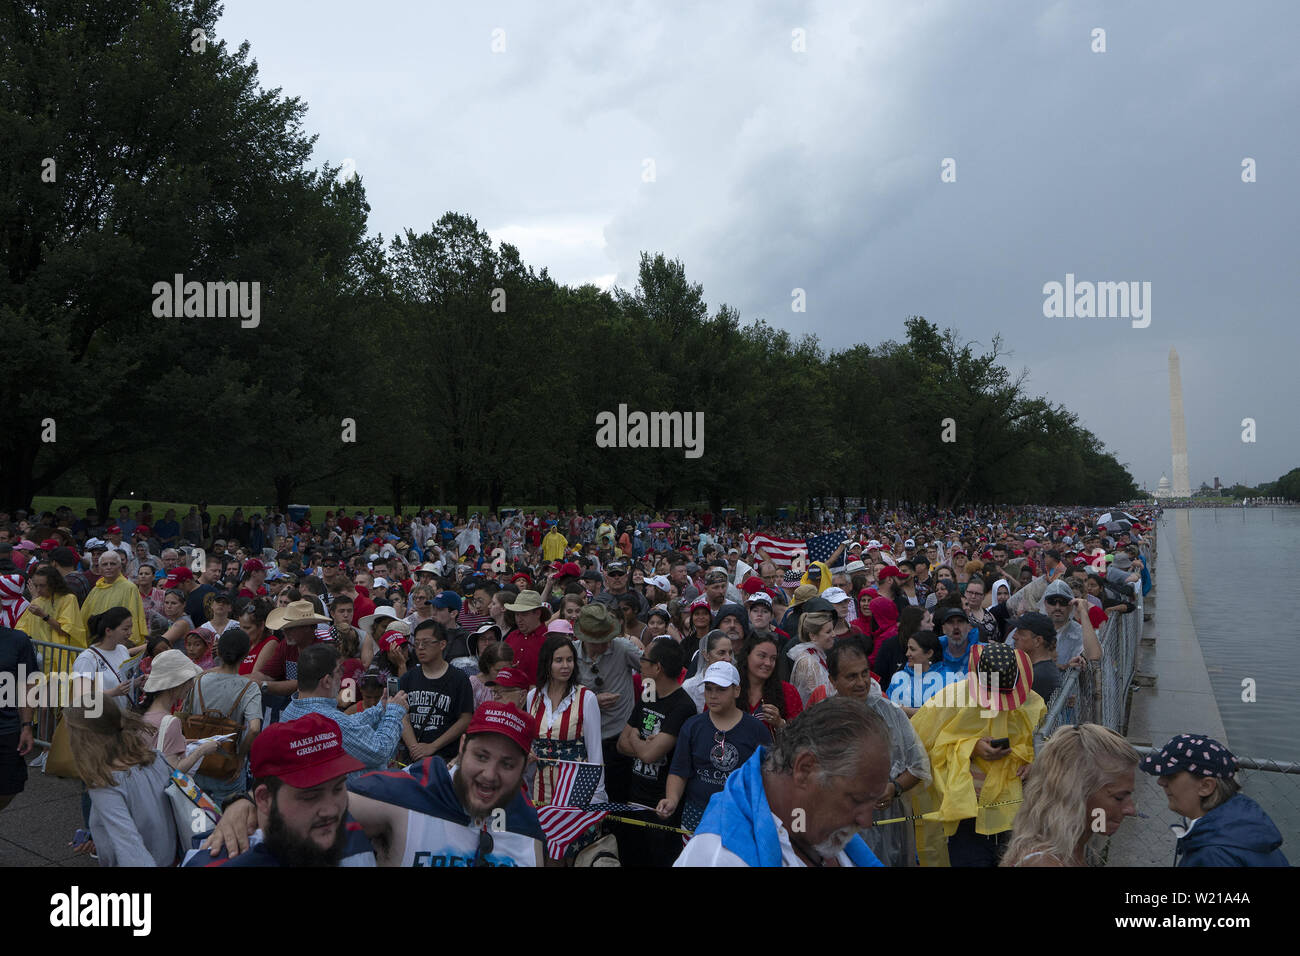 Washington, District of Columbia, USA. 4th July, 2019. Crowds gather in a stormy Washington, DC for United States President Donald J. Trump's Salute to America on July 4, 2019. Credit: Stefani Reynolds/CNP/ZUMA Wire/Alamy Live News Stock Photo